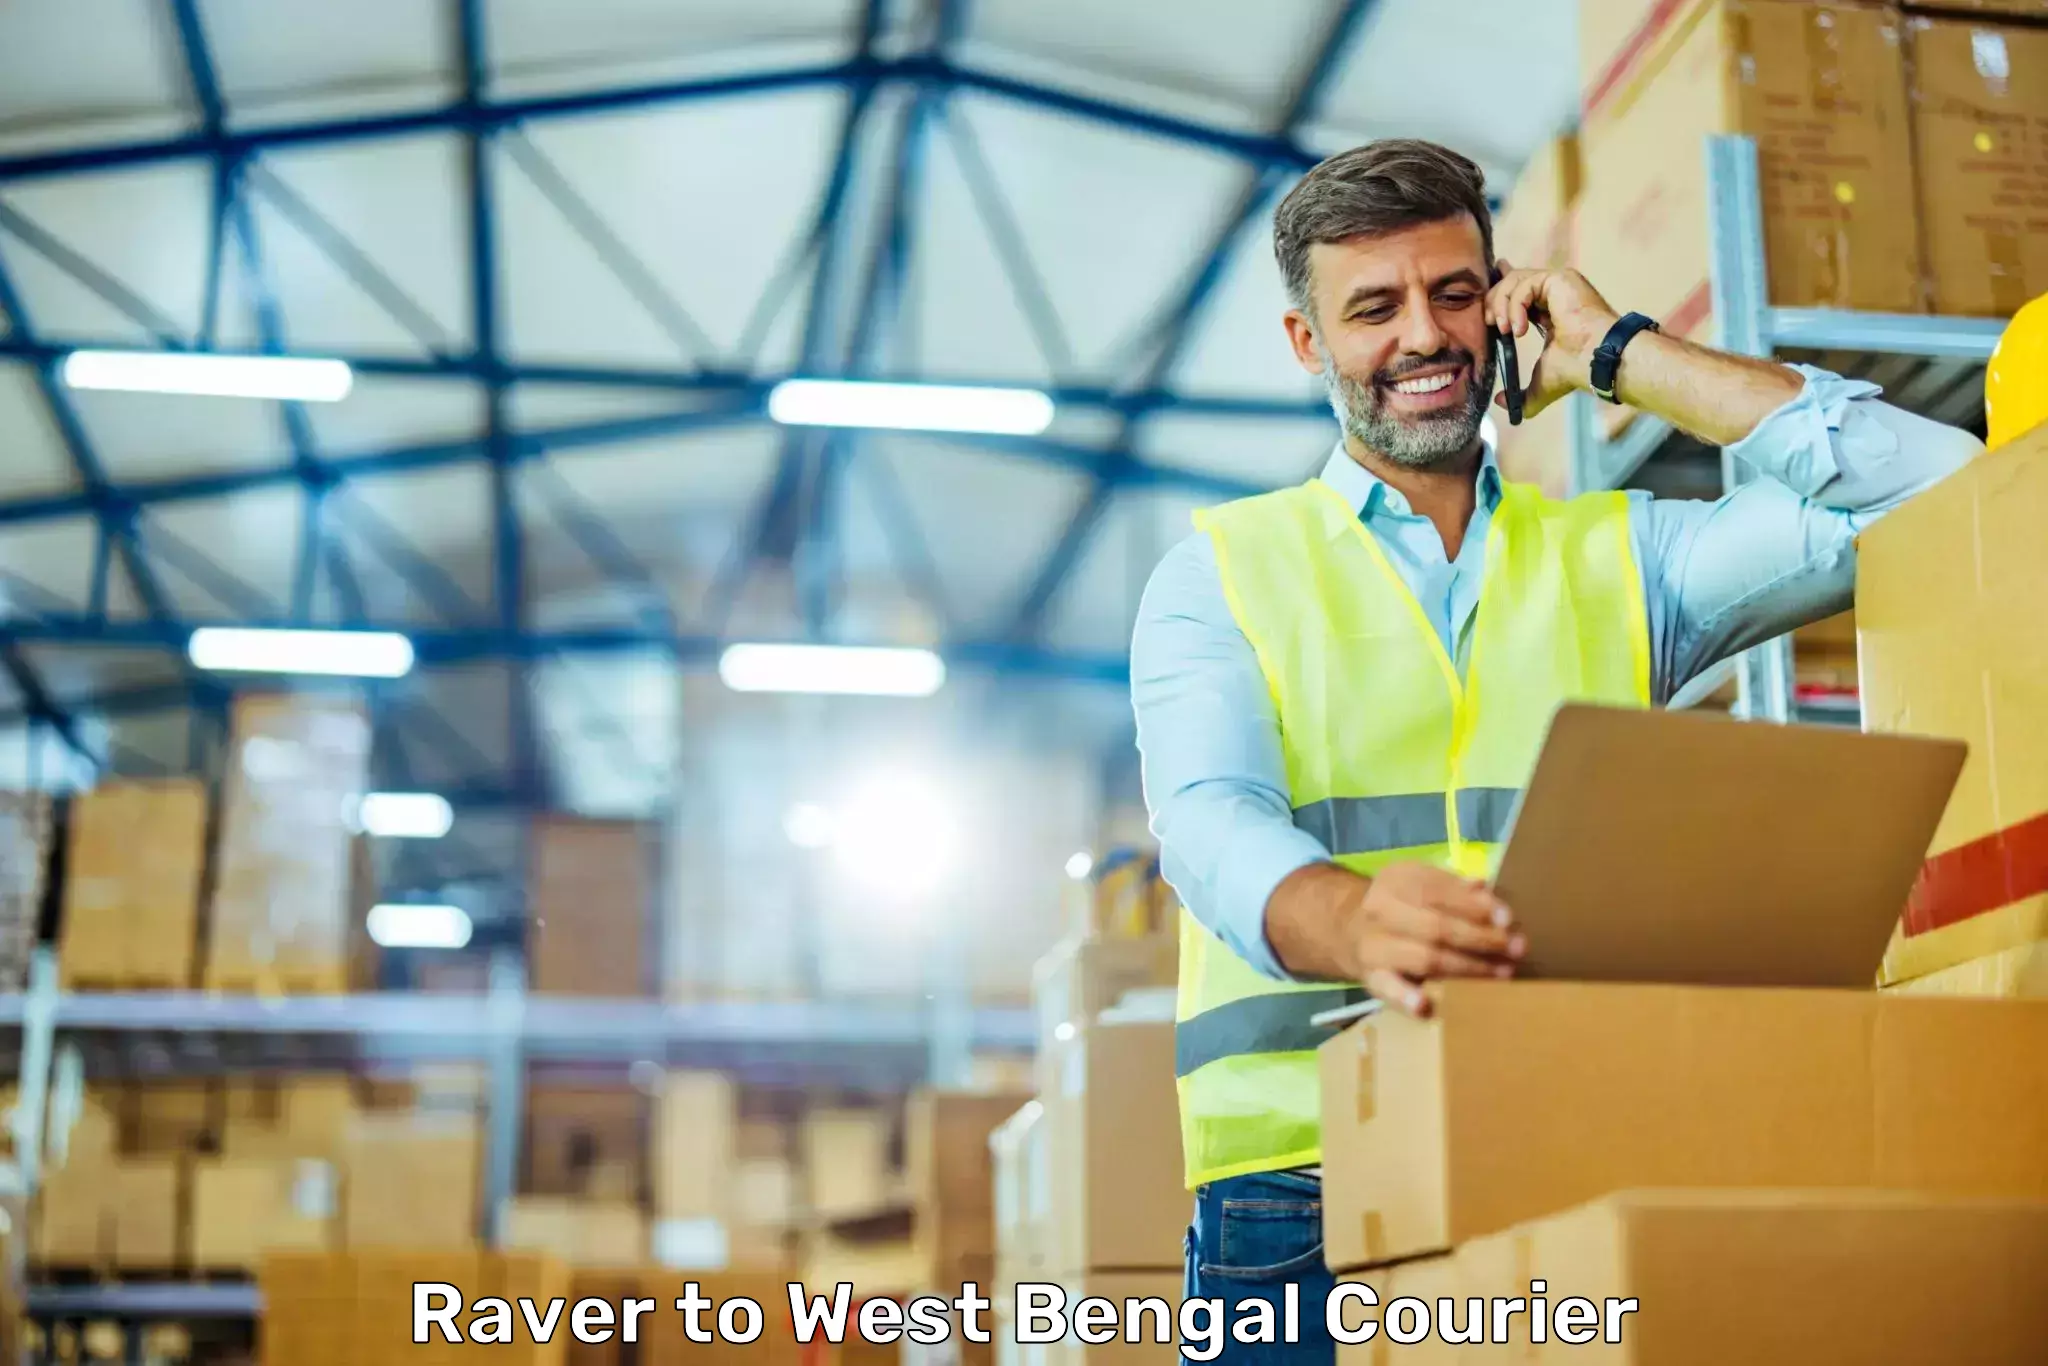 Global logistics network Raver to Hooghly